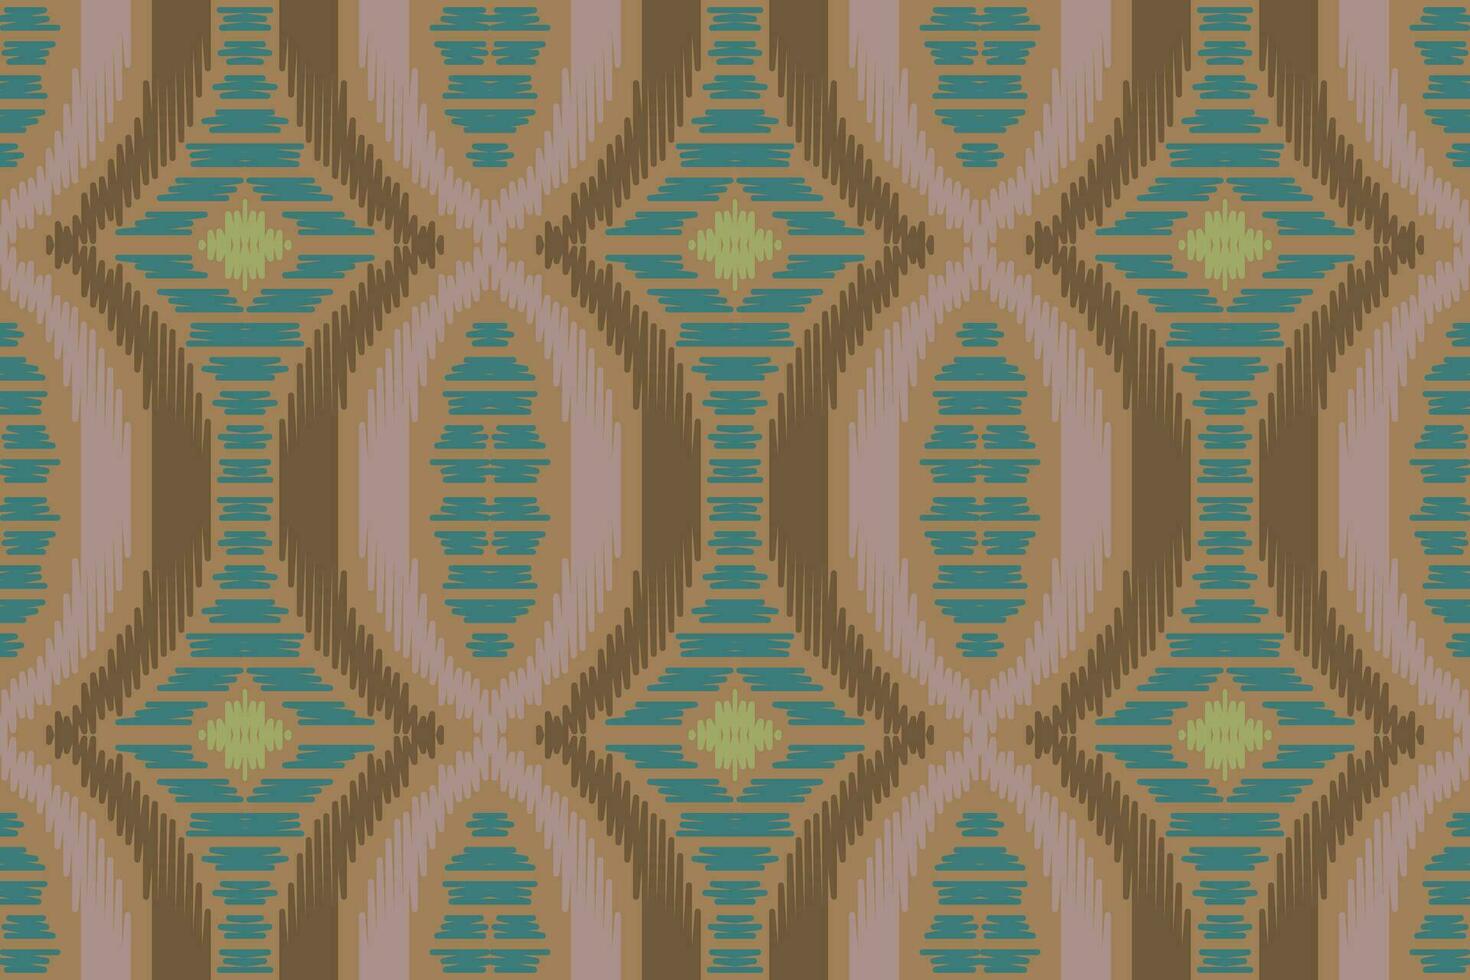 Motif Ikat Seamless Pattern Embroidery Background. Ikat Background Geometric Ethnic Oriental Pattern Traditional. Ikat Aztec Style Abstract Design for Print Texture,fabric,saree,sari,carpet. vector